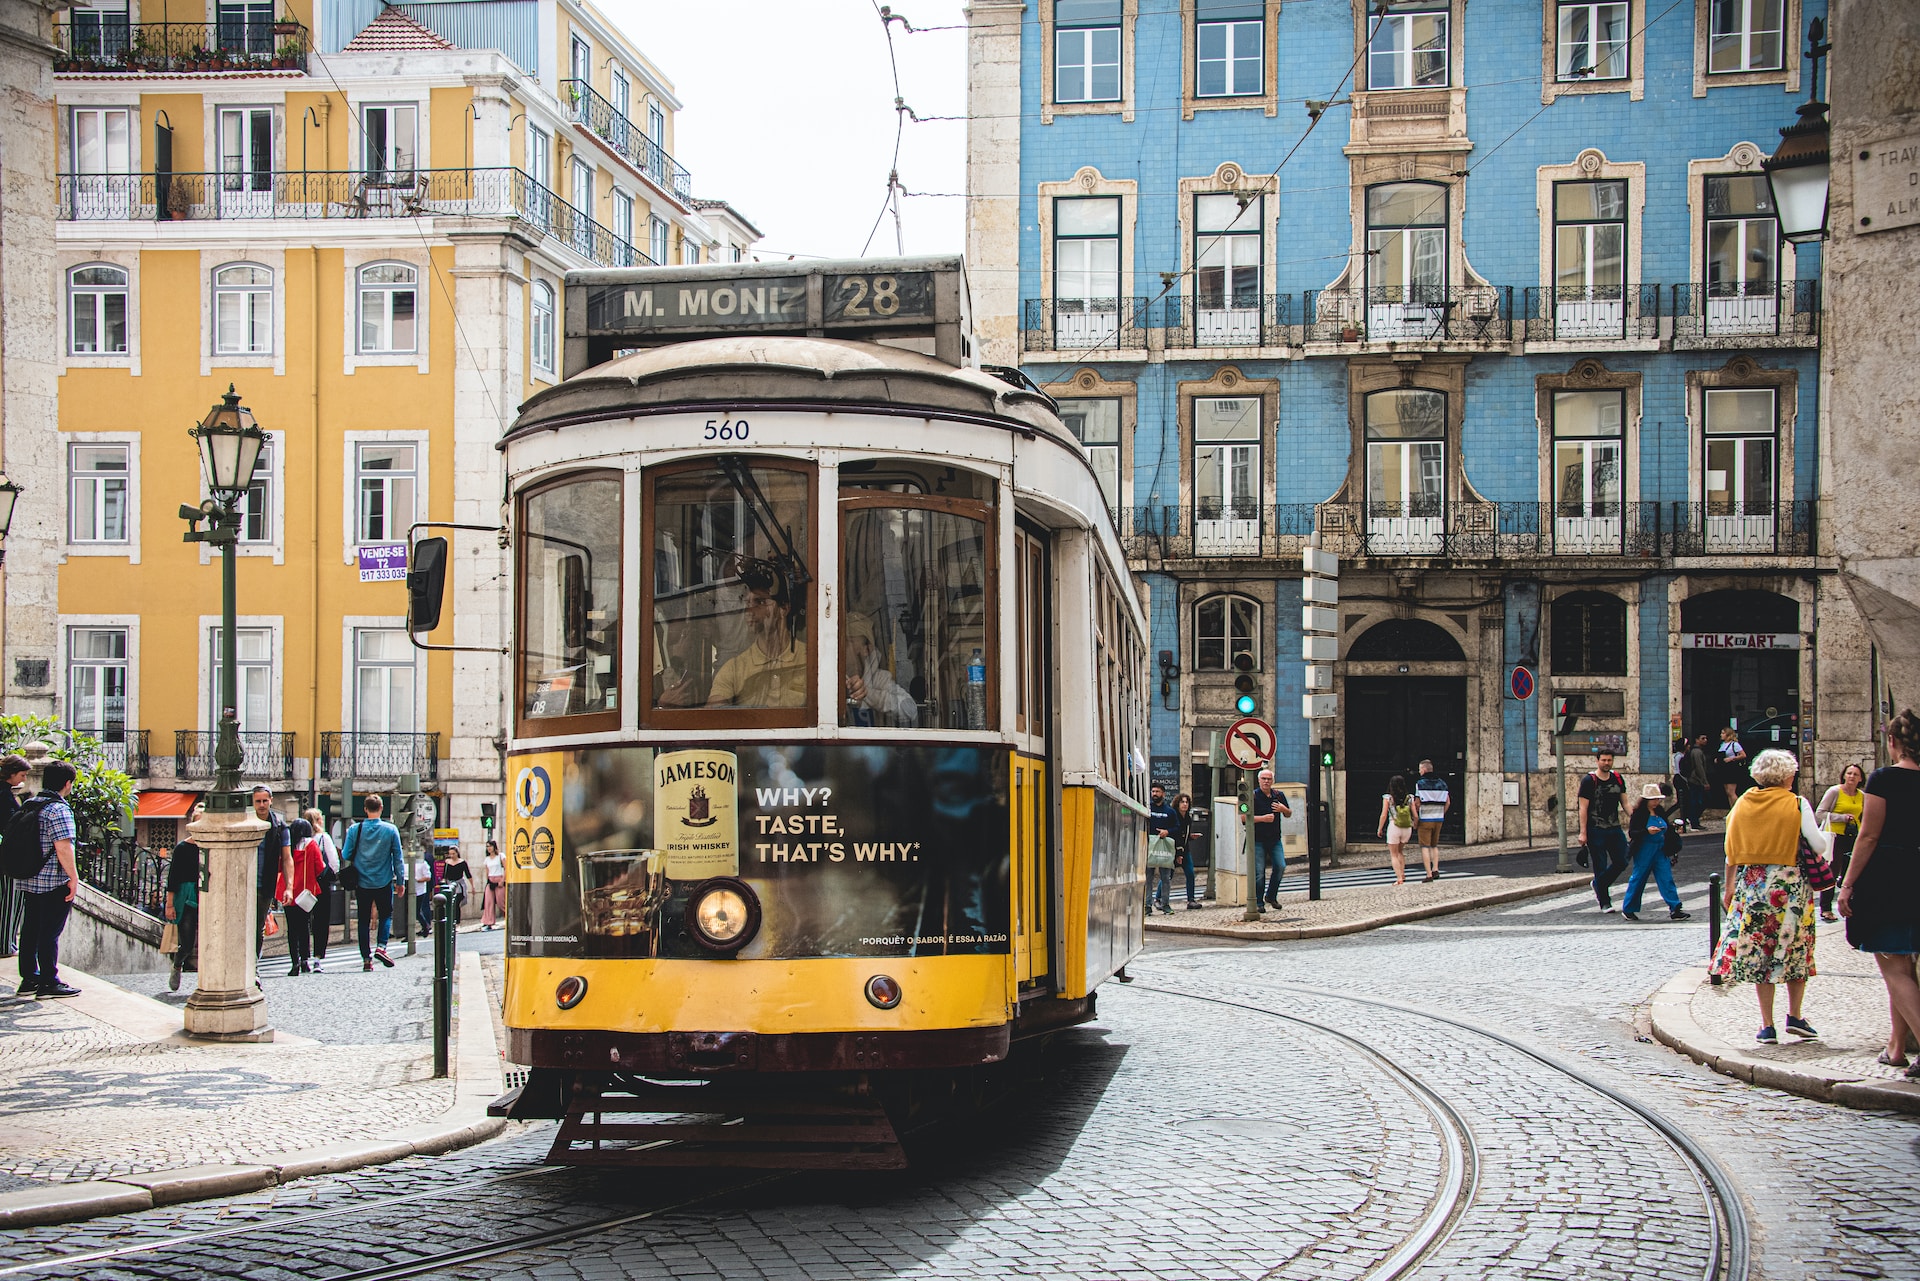 Tram in Lisbon, one of Portugal's most visited cities (photo: Paulo Evangelista)